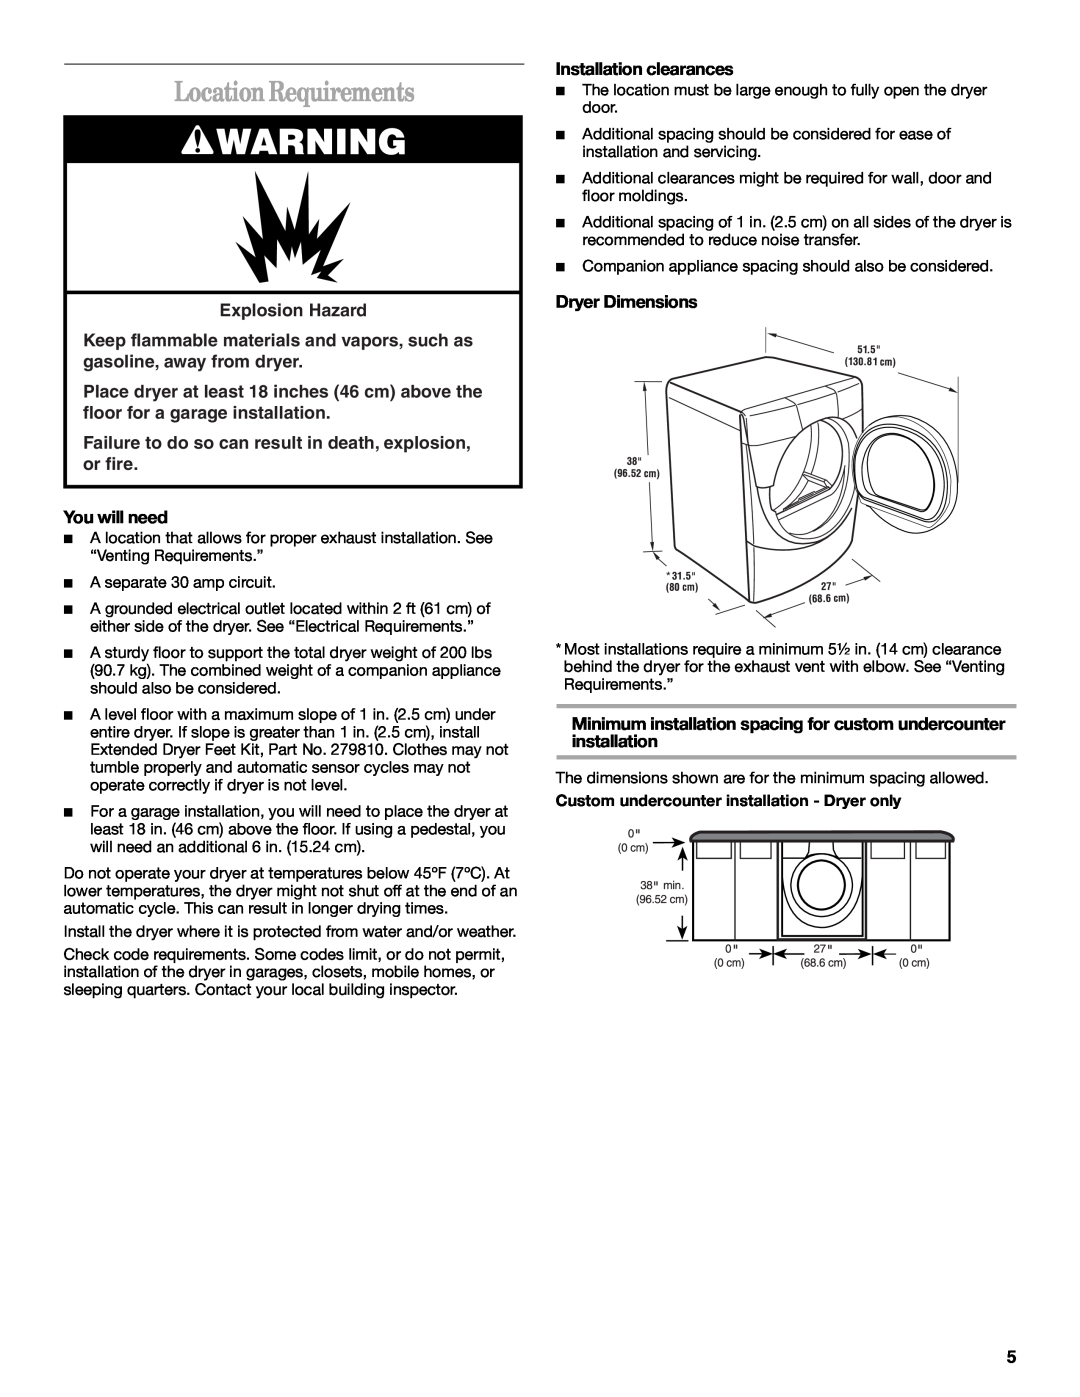 Whirlpool GEW9200LQ0 Location Requirements, Explosion Hazard, Failure to do so can result in death, explosion, or fire 